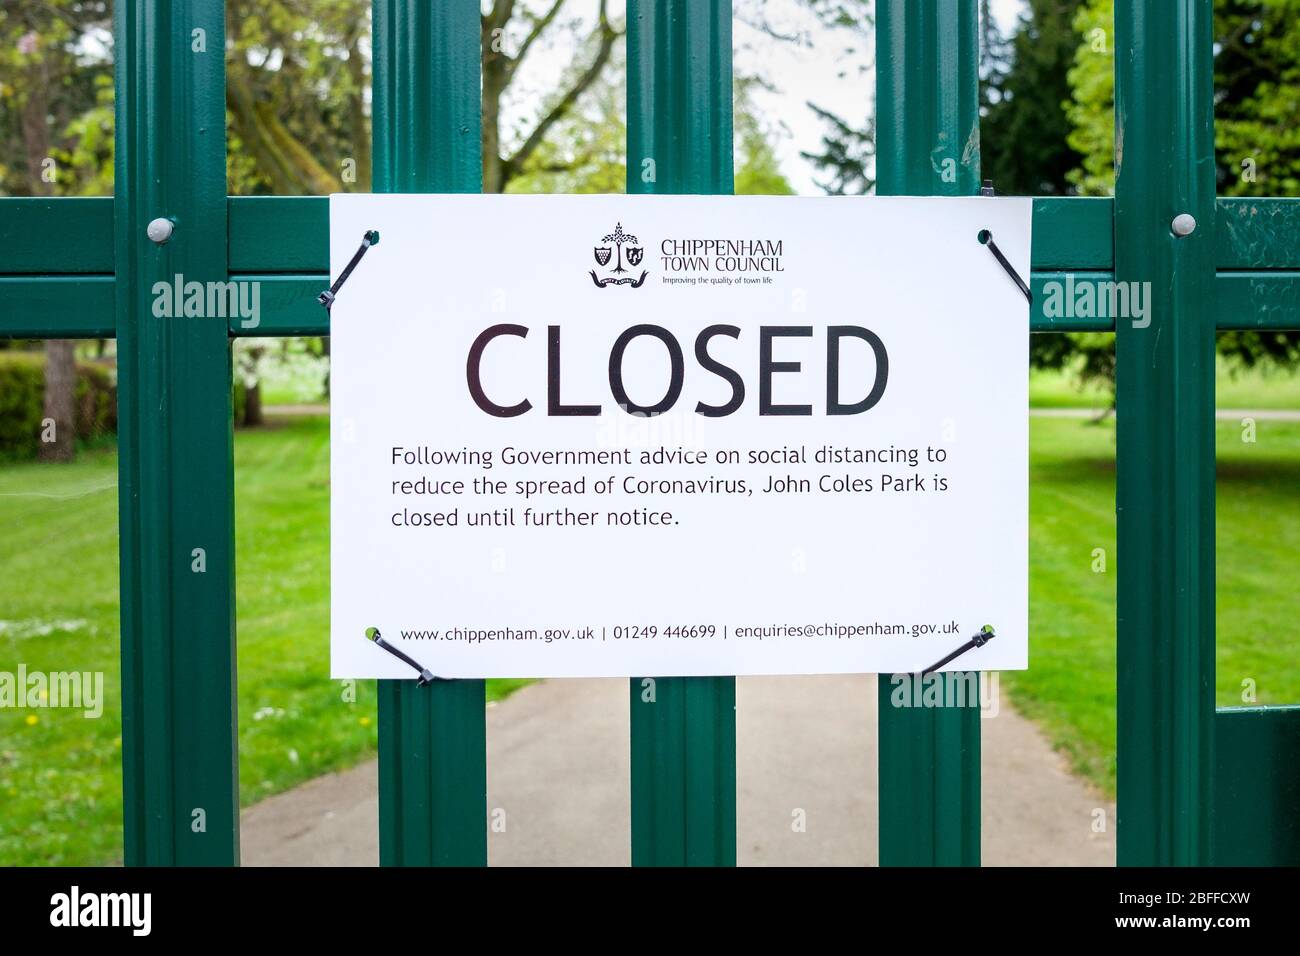 A sign informing the public that a park is closed due to the coronavirus covid 19 outbreak is pictured at an entrance to a public park in Chippenham Stock Photo